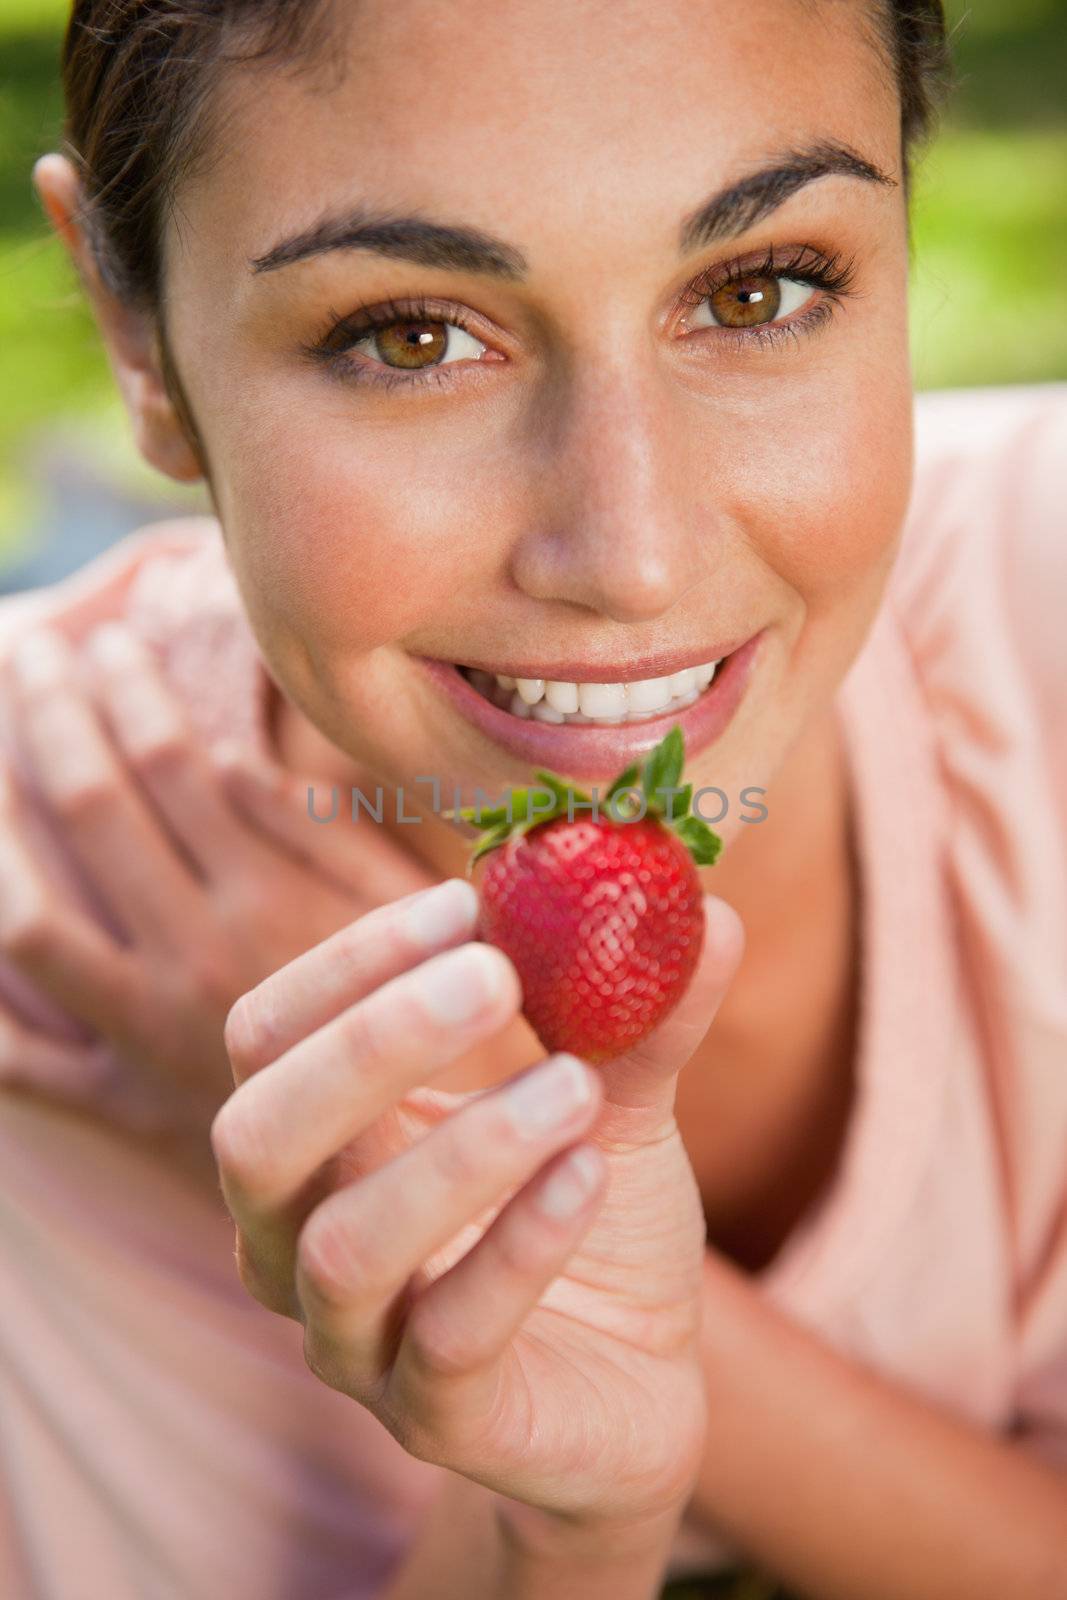 Woman smiling while offering a strawberry as she lies prone in grass